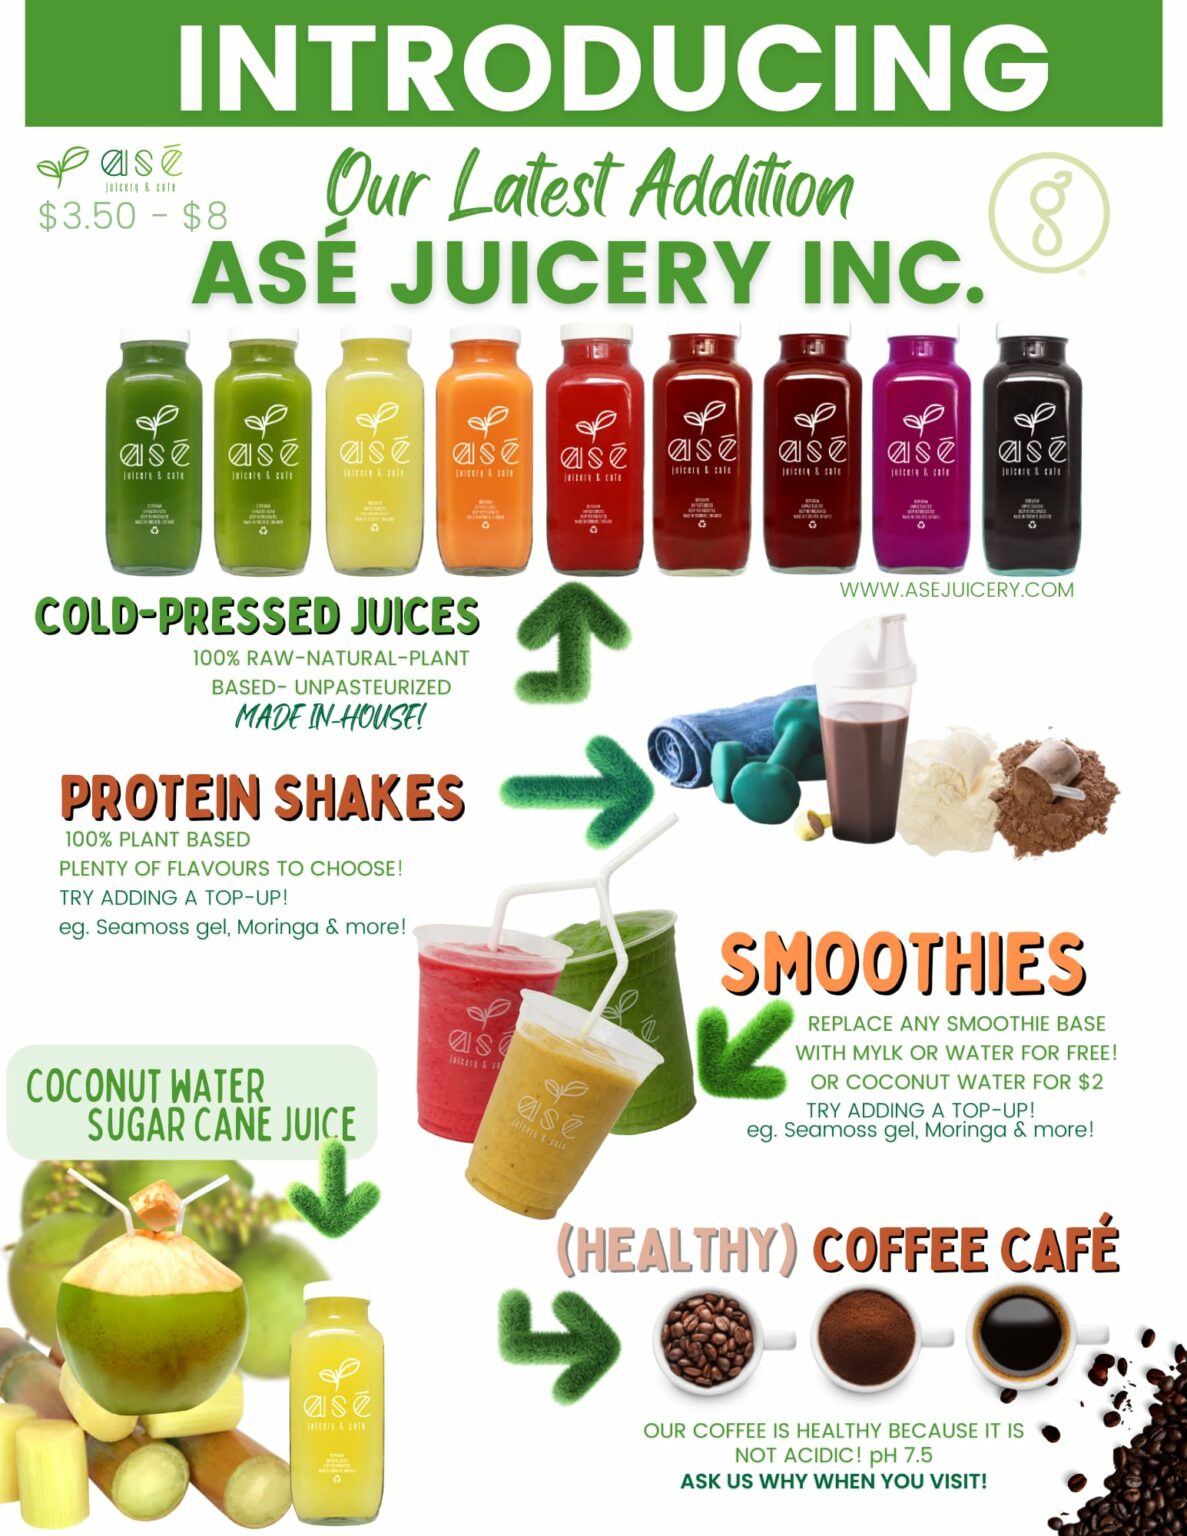 Products offered by Ase Juicery at Grow Fitness